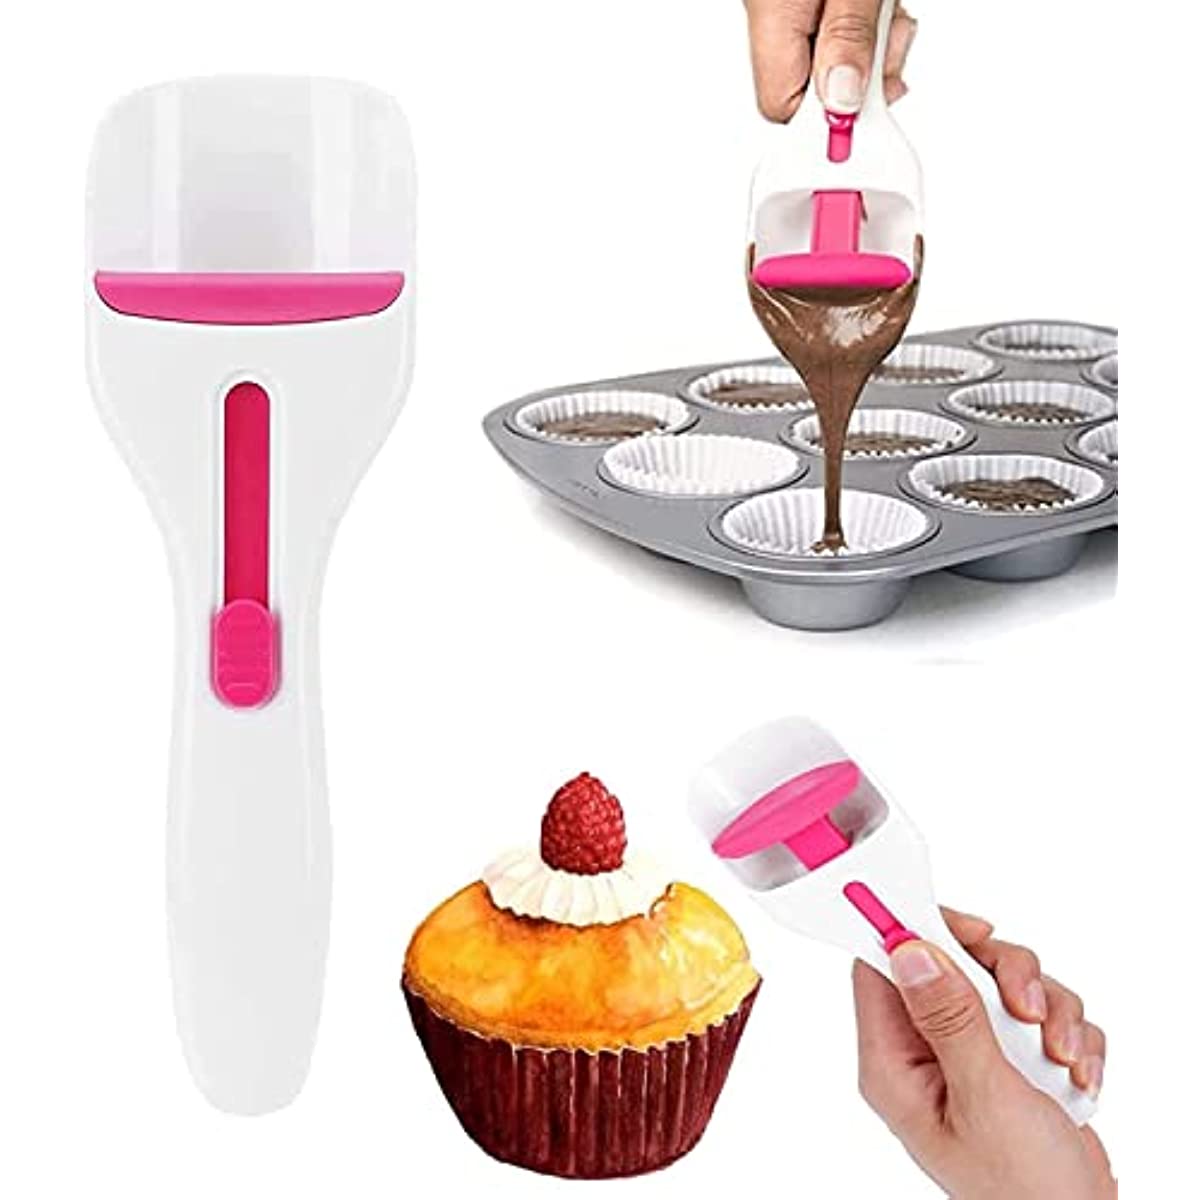 Cupcake Scoop, kitchen, cupcake, batter, I need this in my kitchen!😍  This scoop will help you achieve equal amounts of batter each time you pour  it in🧁🎂🍰🧁, By Upstronge